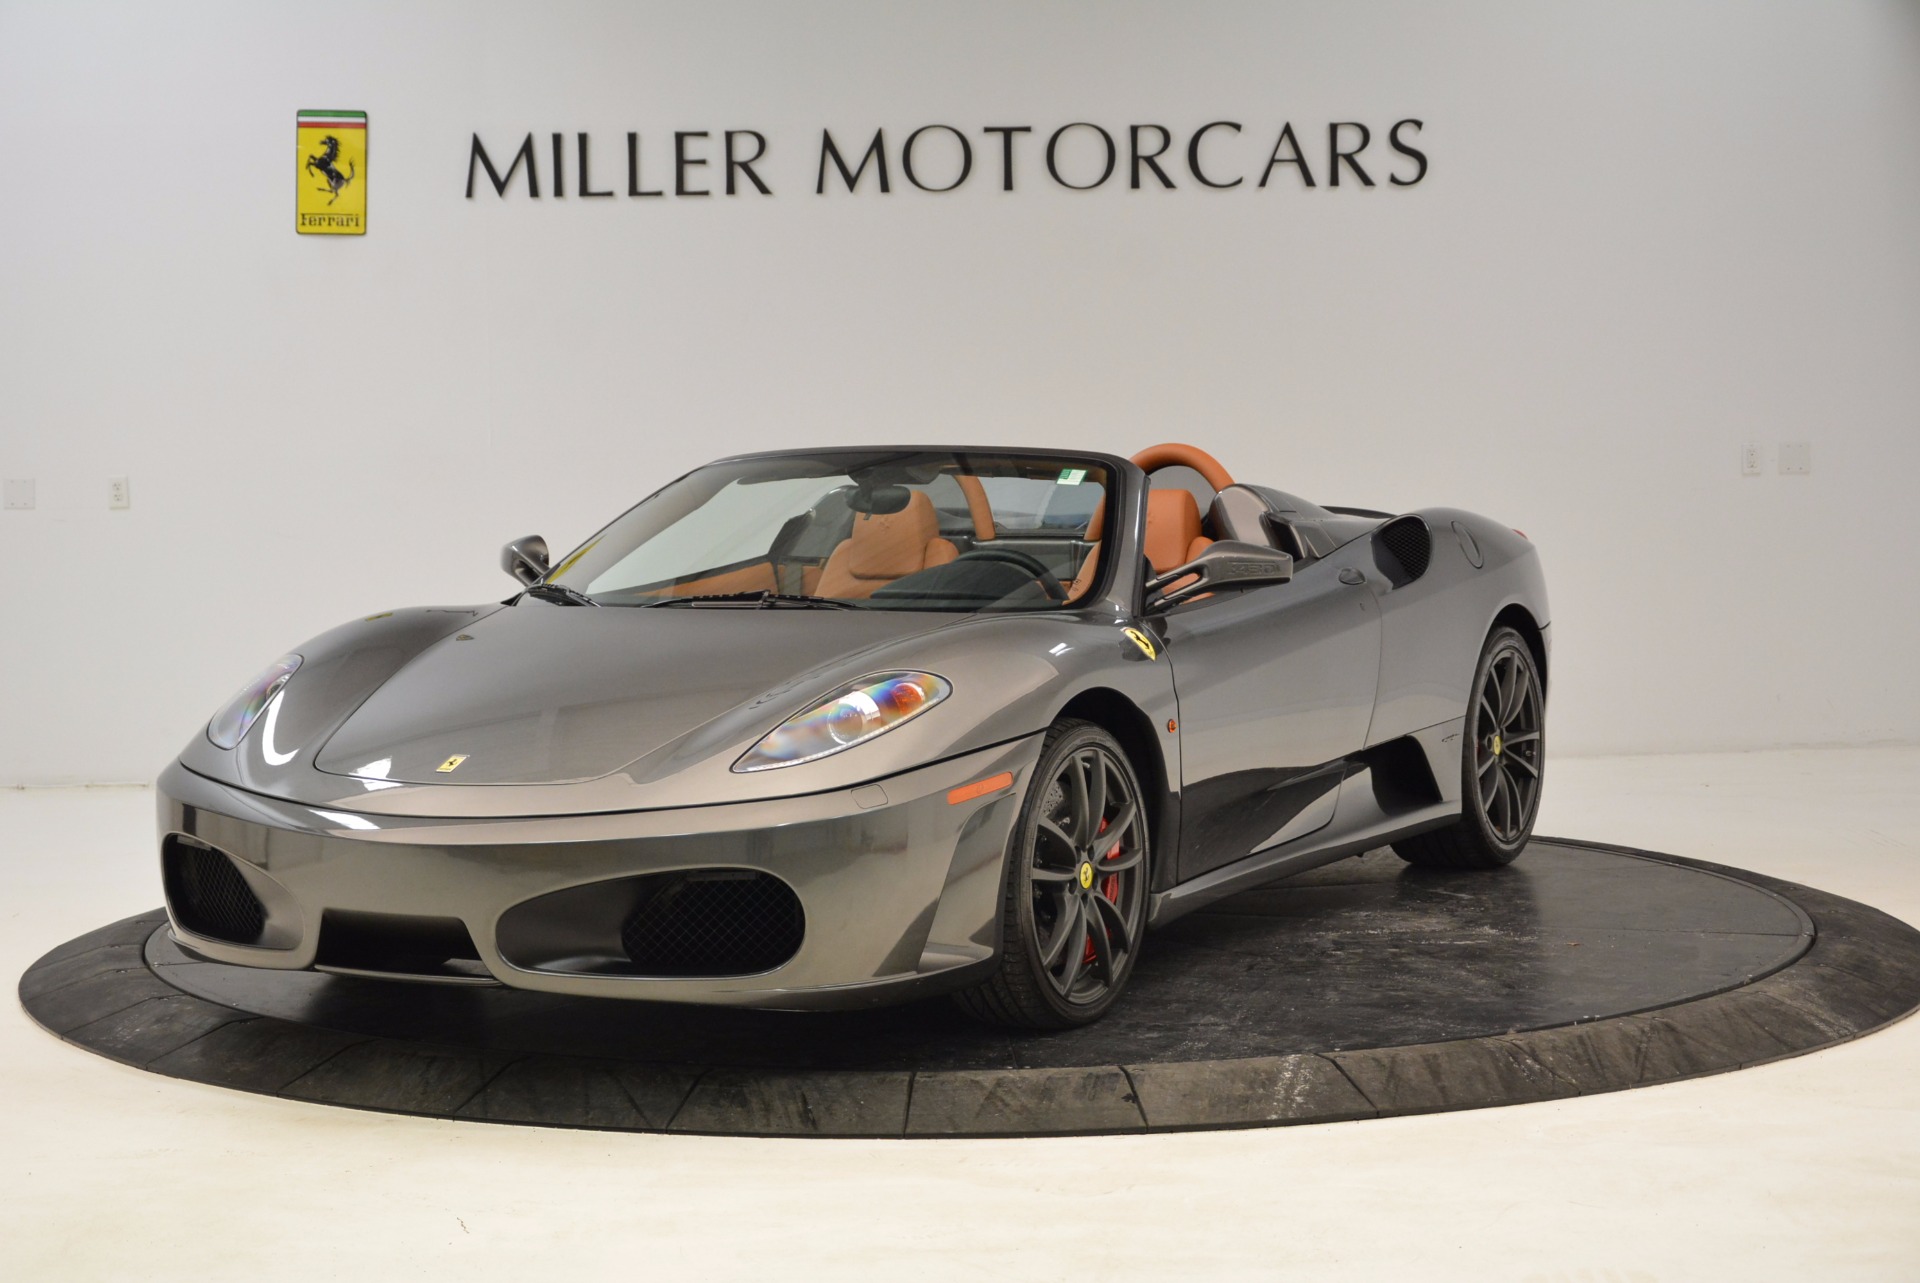 Used 2008 Ferrari F430 Spider for sale Sold at Aston Martin of Greenwich in Greenwich CT 06830 1